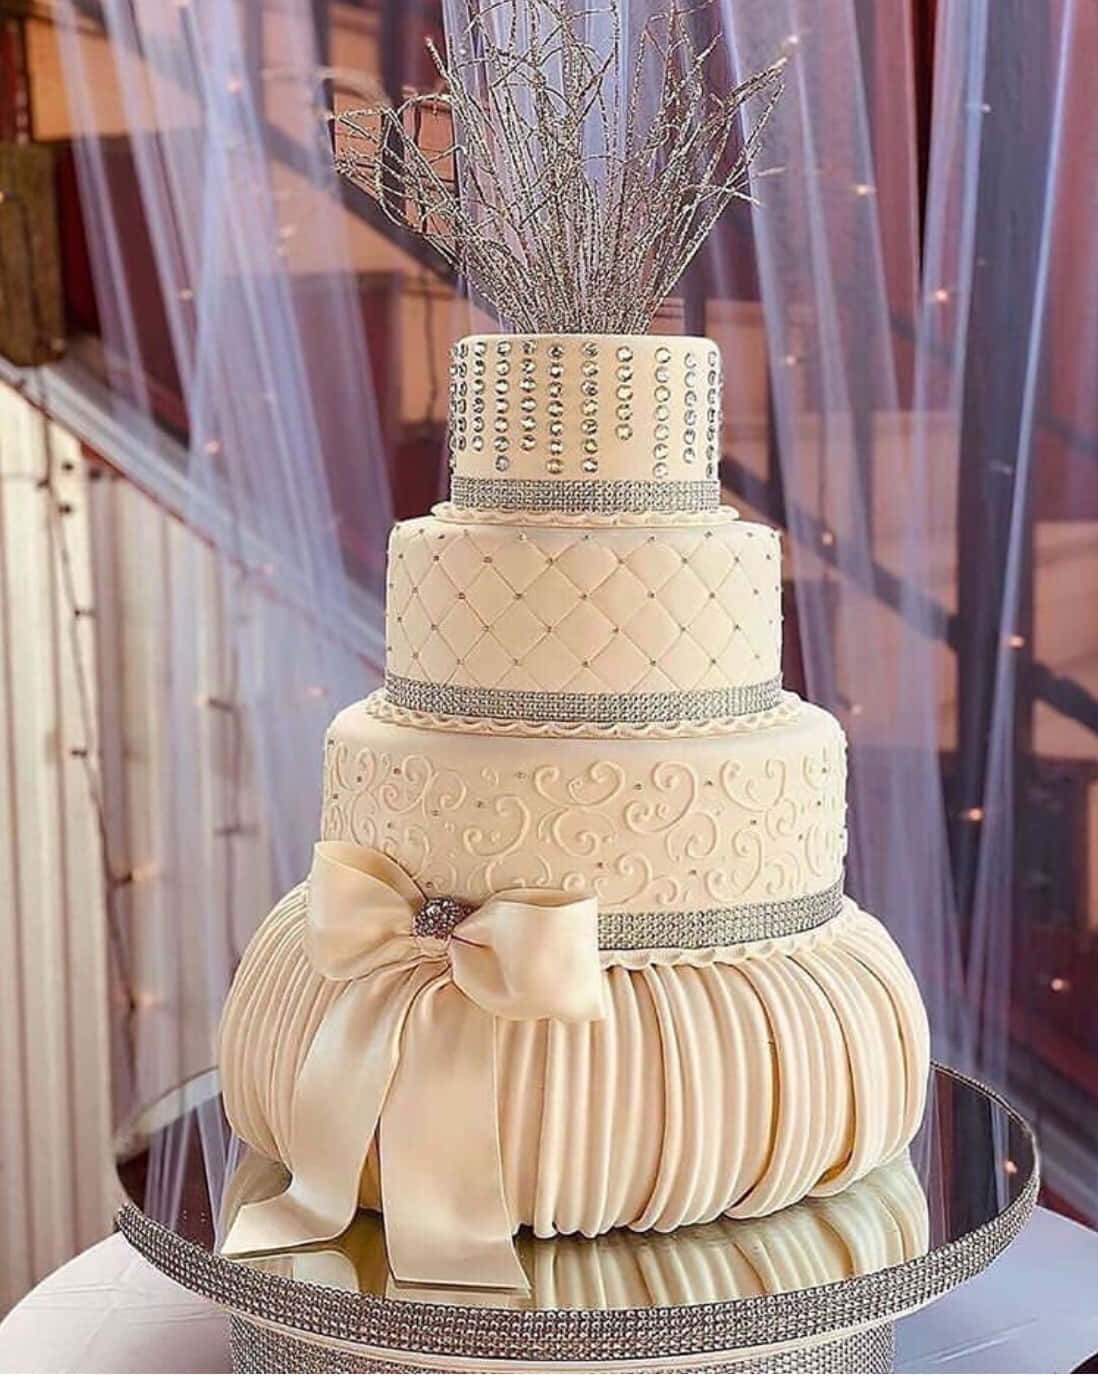 "A multi-layered Wedding Cake with a White Frosting and Fresh Flowers"